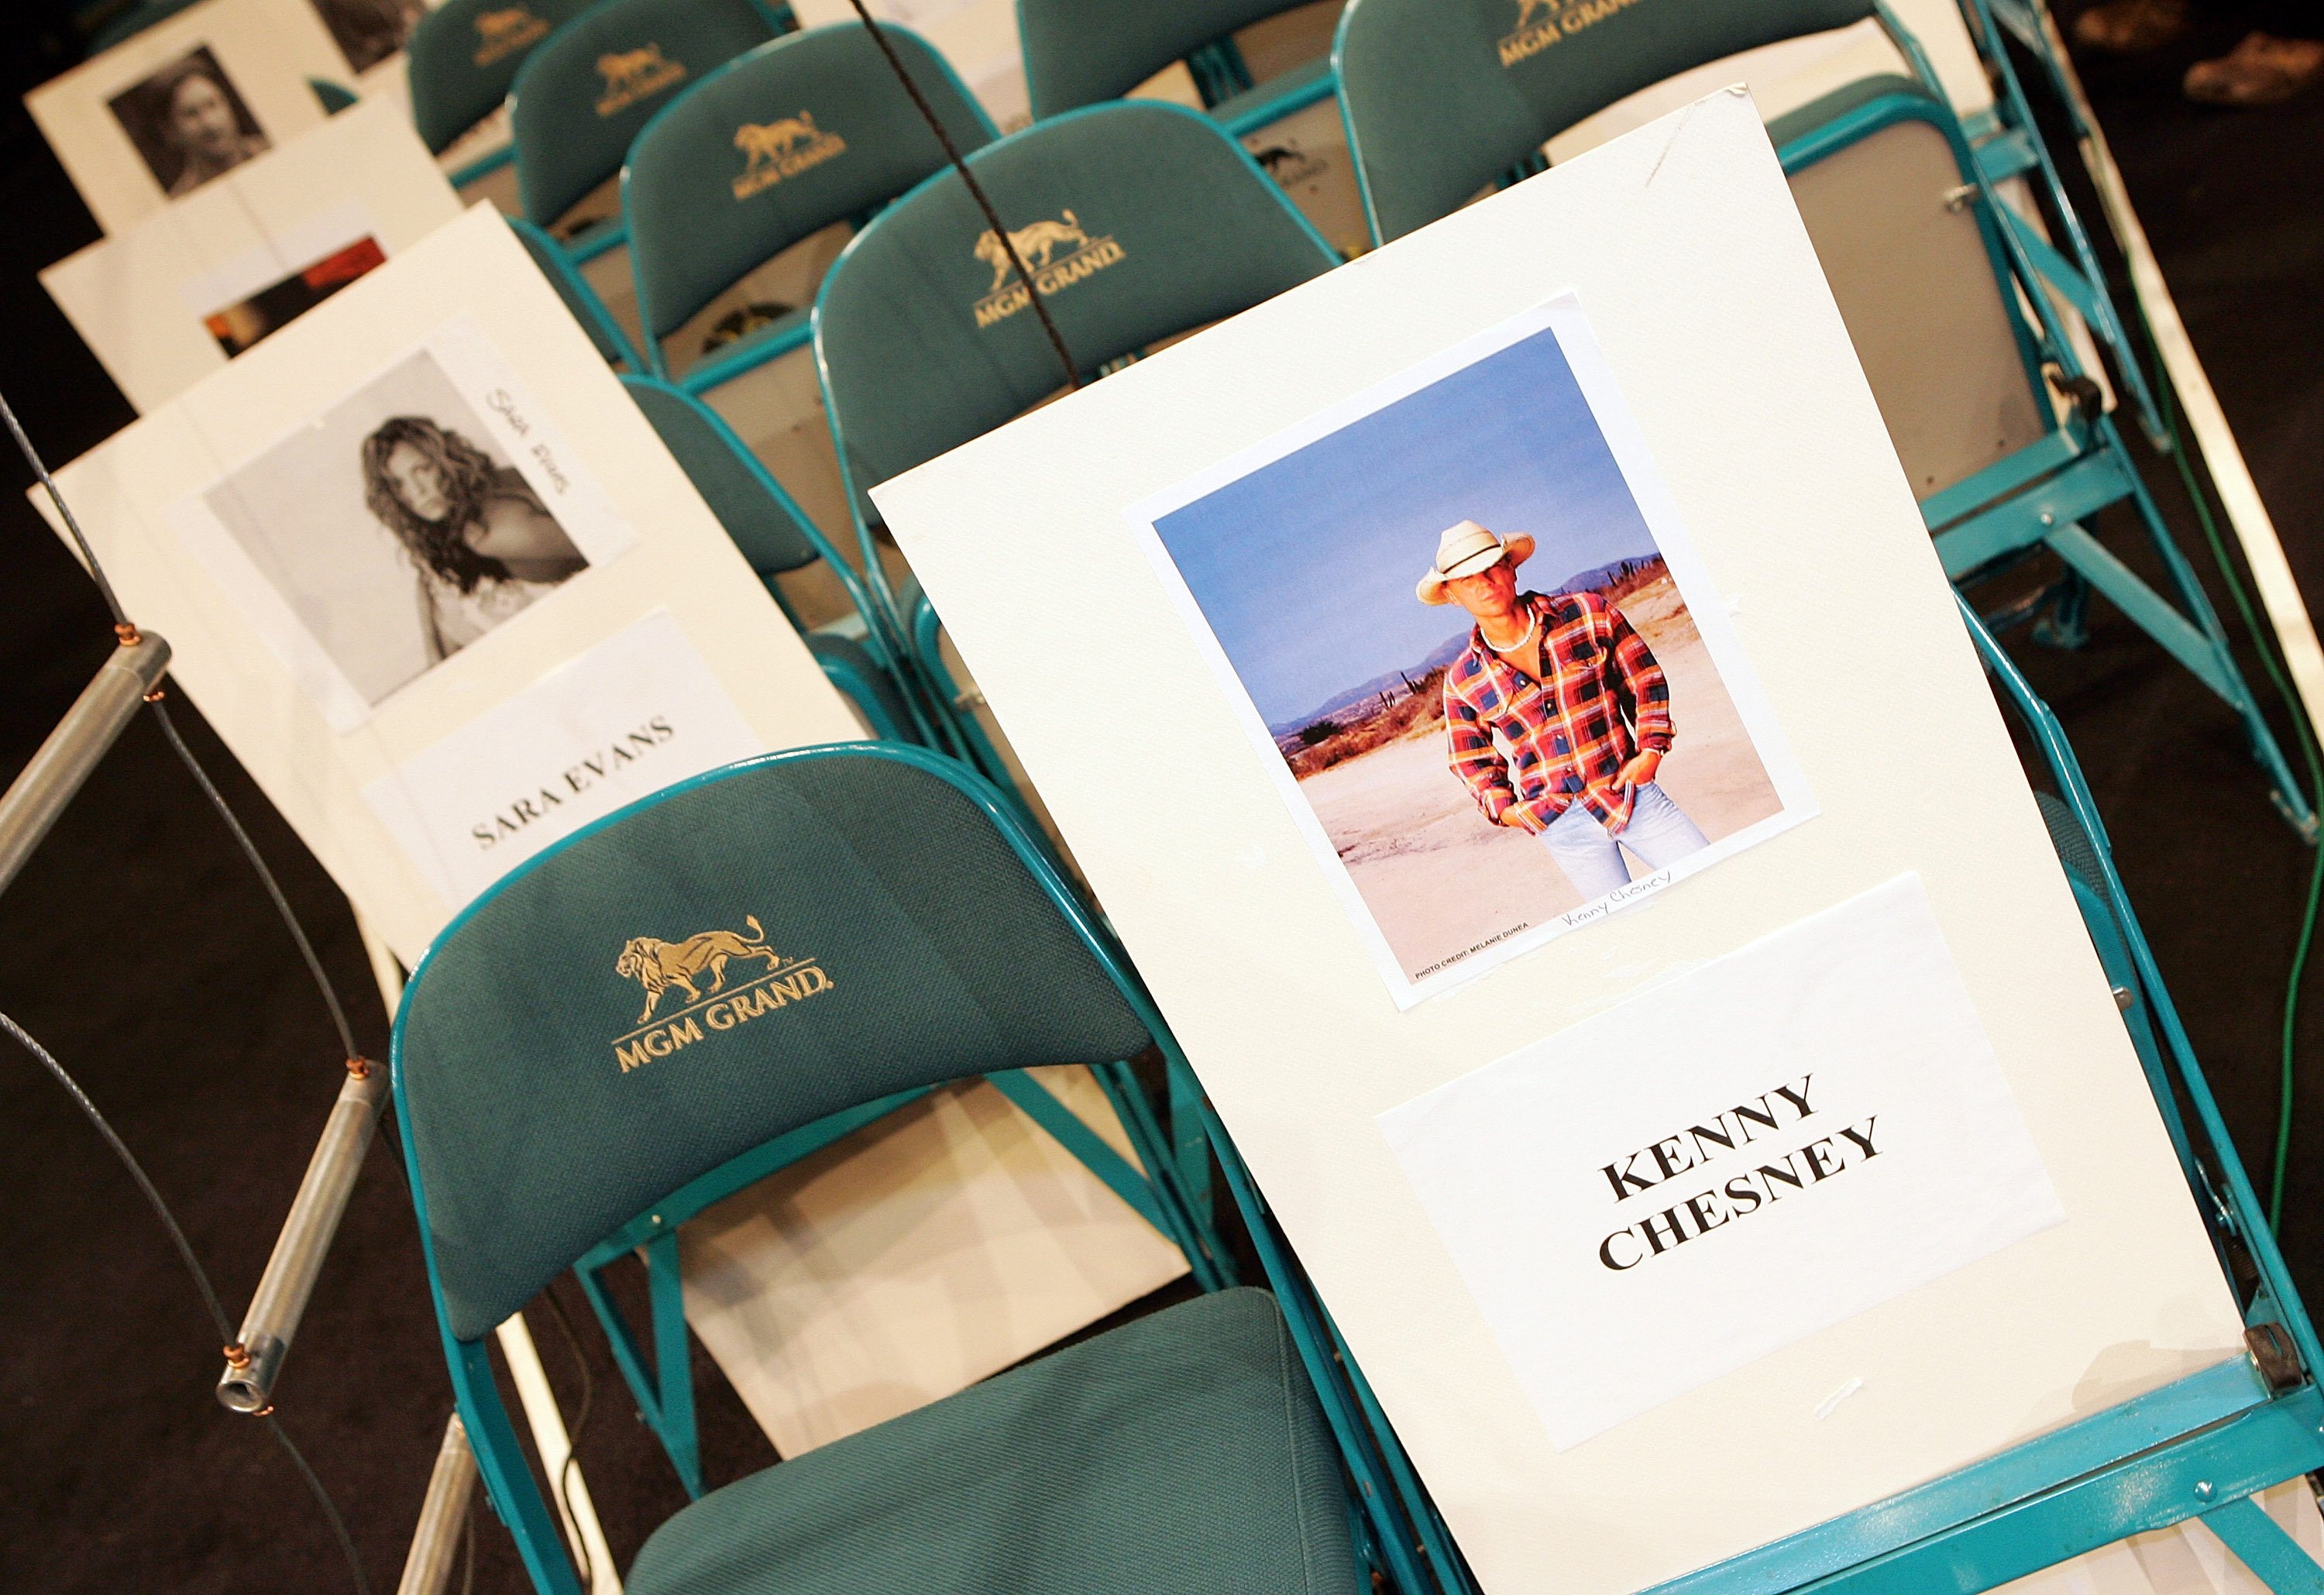 Placeholders for artists Kenny Chesney and Sara Evans are seen in seats during a rehearsal for the 42nd Annual Academy of Country Music Awards at the MGM Grand Garden Arena, May 12, 2007, in Las Vegas, Nevada. | Source: Getty Images